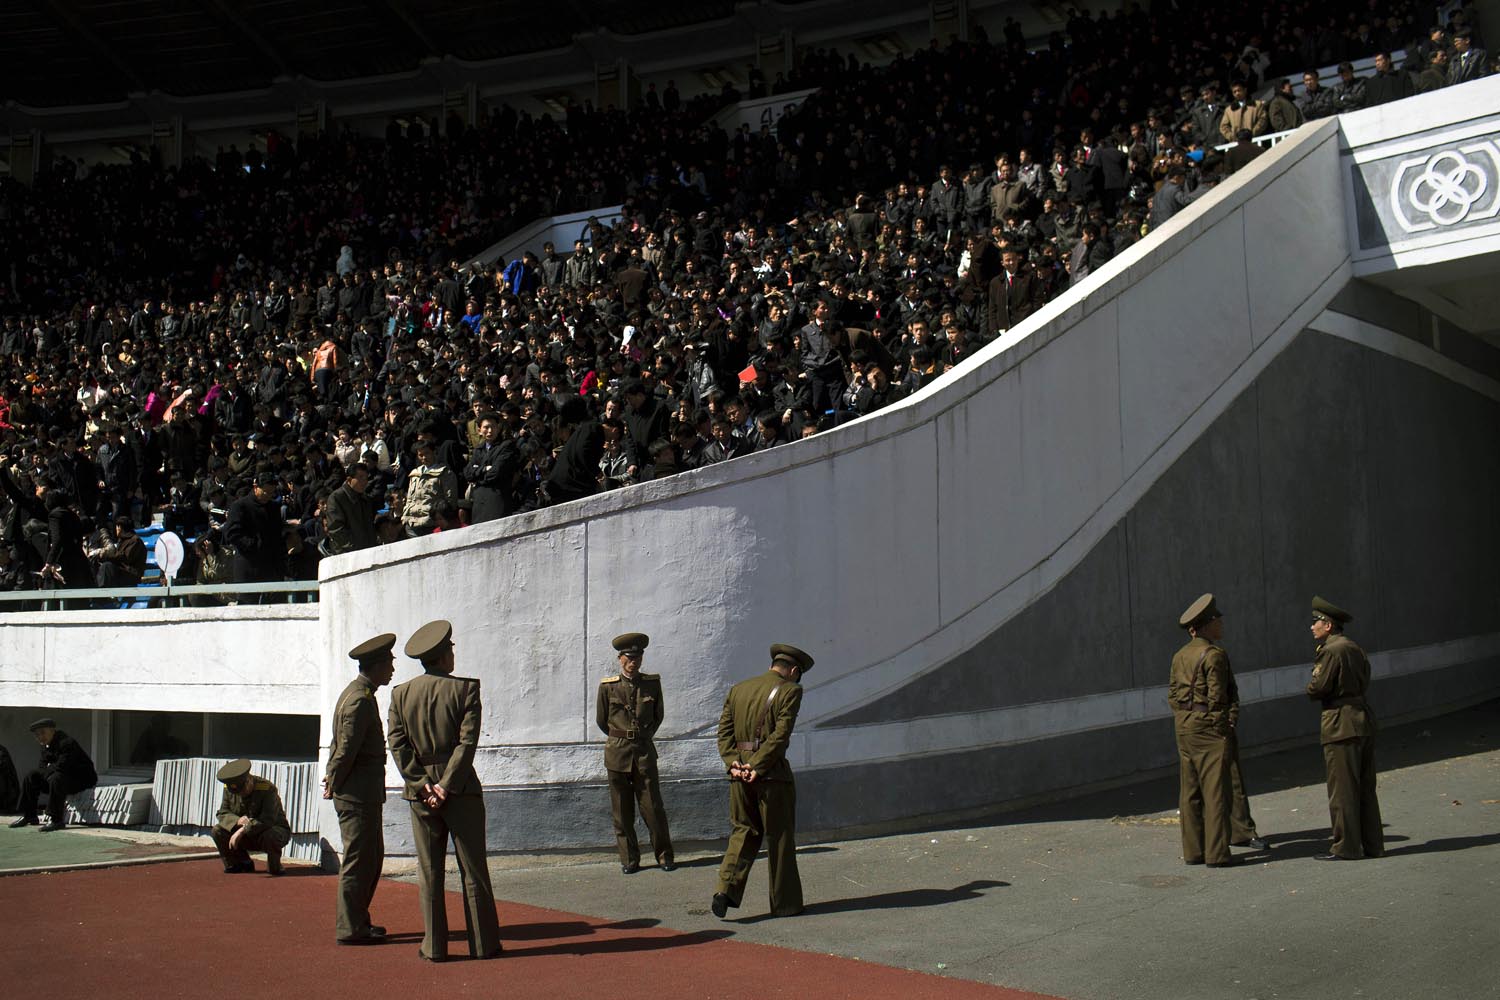 April 14, 2013. North Korean soldiers stand guard inside Pyongyang's Kim Il Sung Stadium.